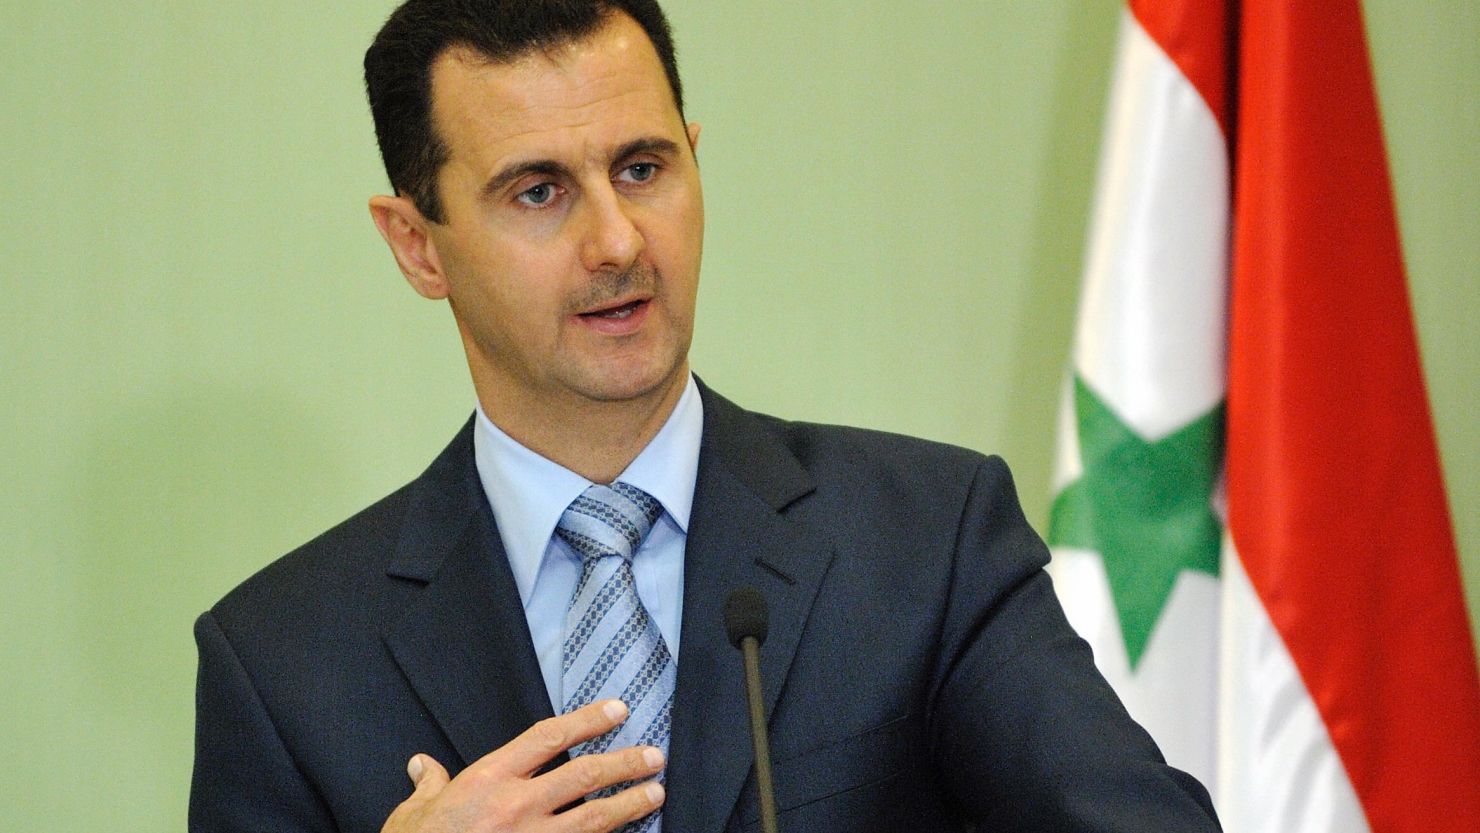 Syria's deputy prime minister reportedly dismissed talk of the resignation of Bashar al-Assad, who is pictured here in 2009. 